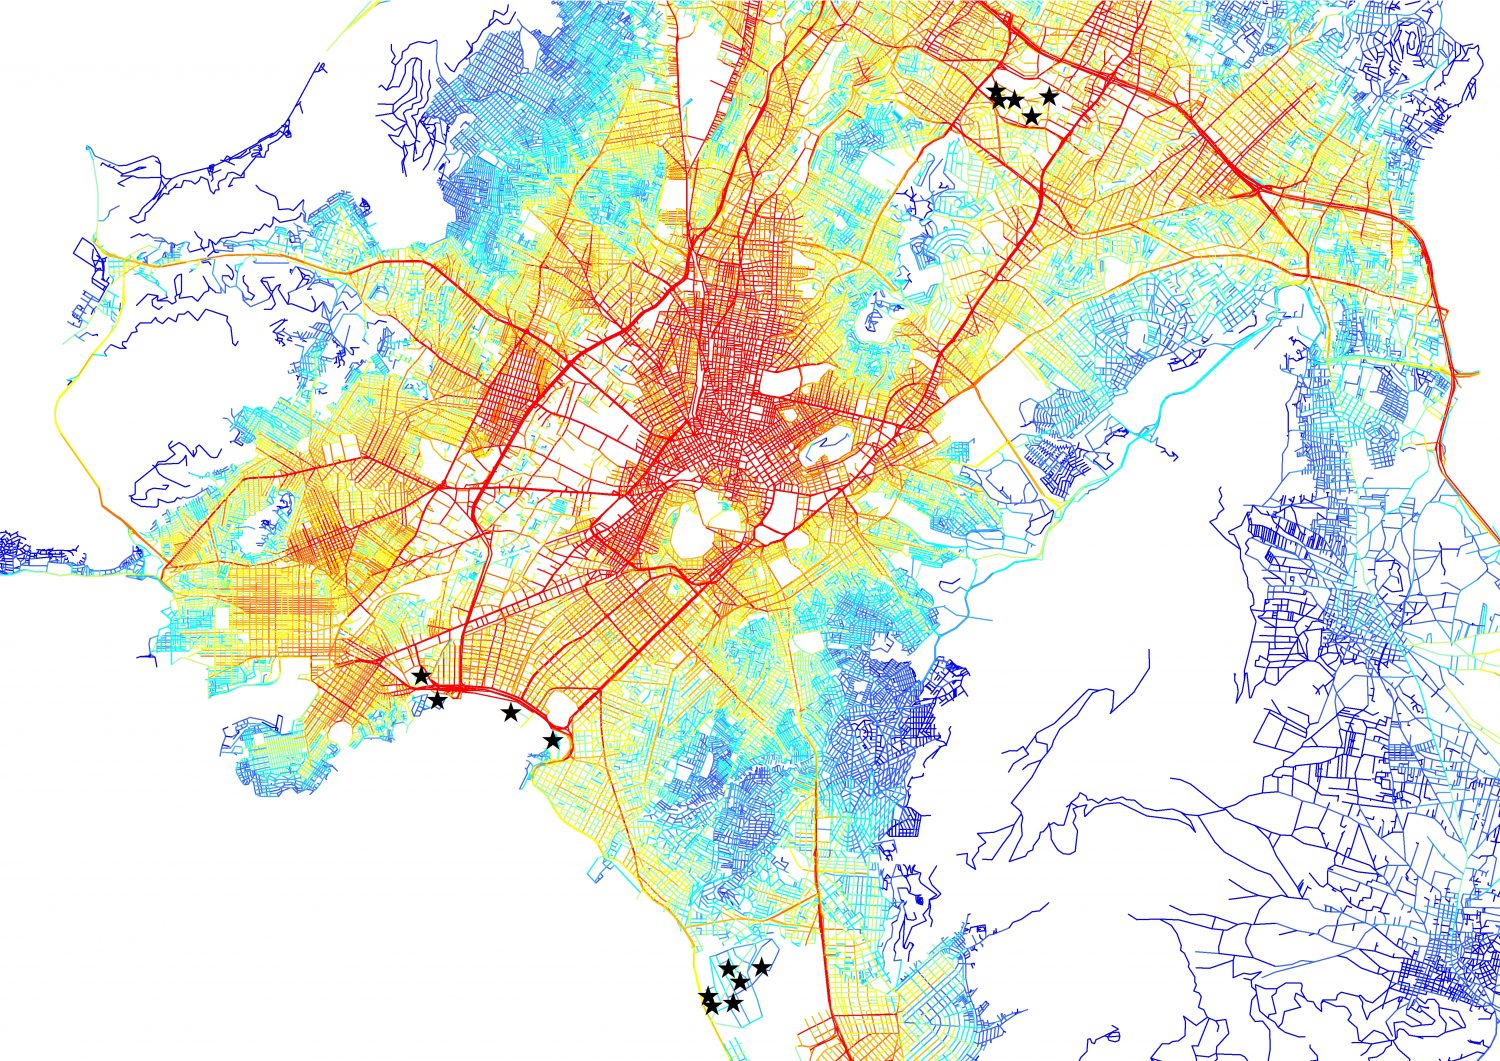 phd candidate in spatial analysis and urban modelling